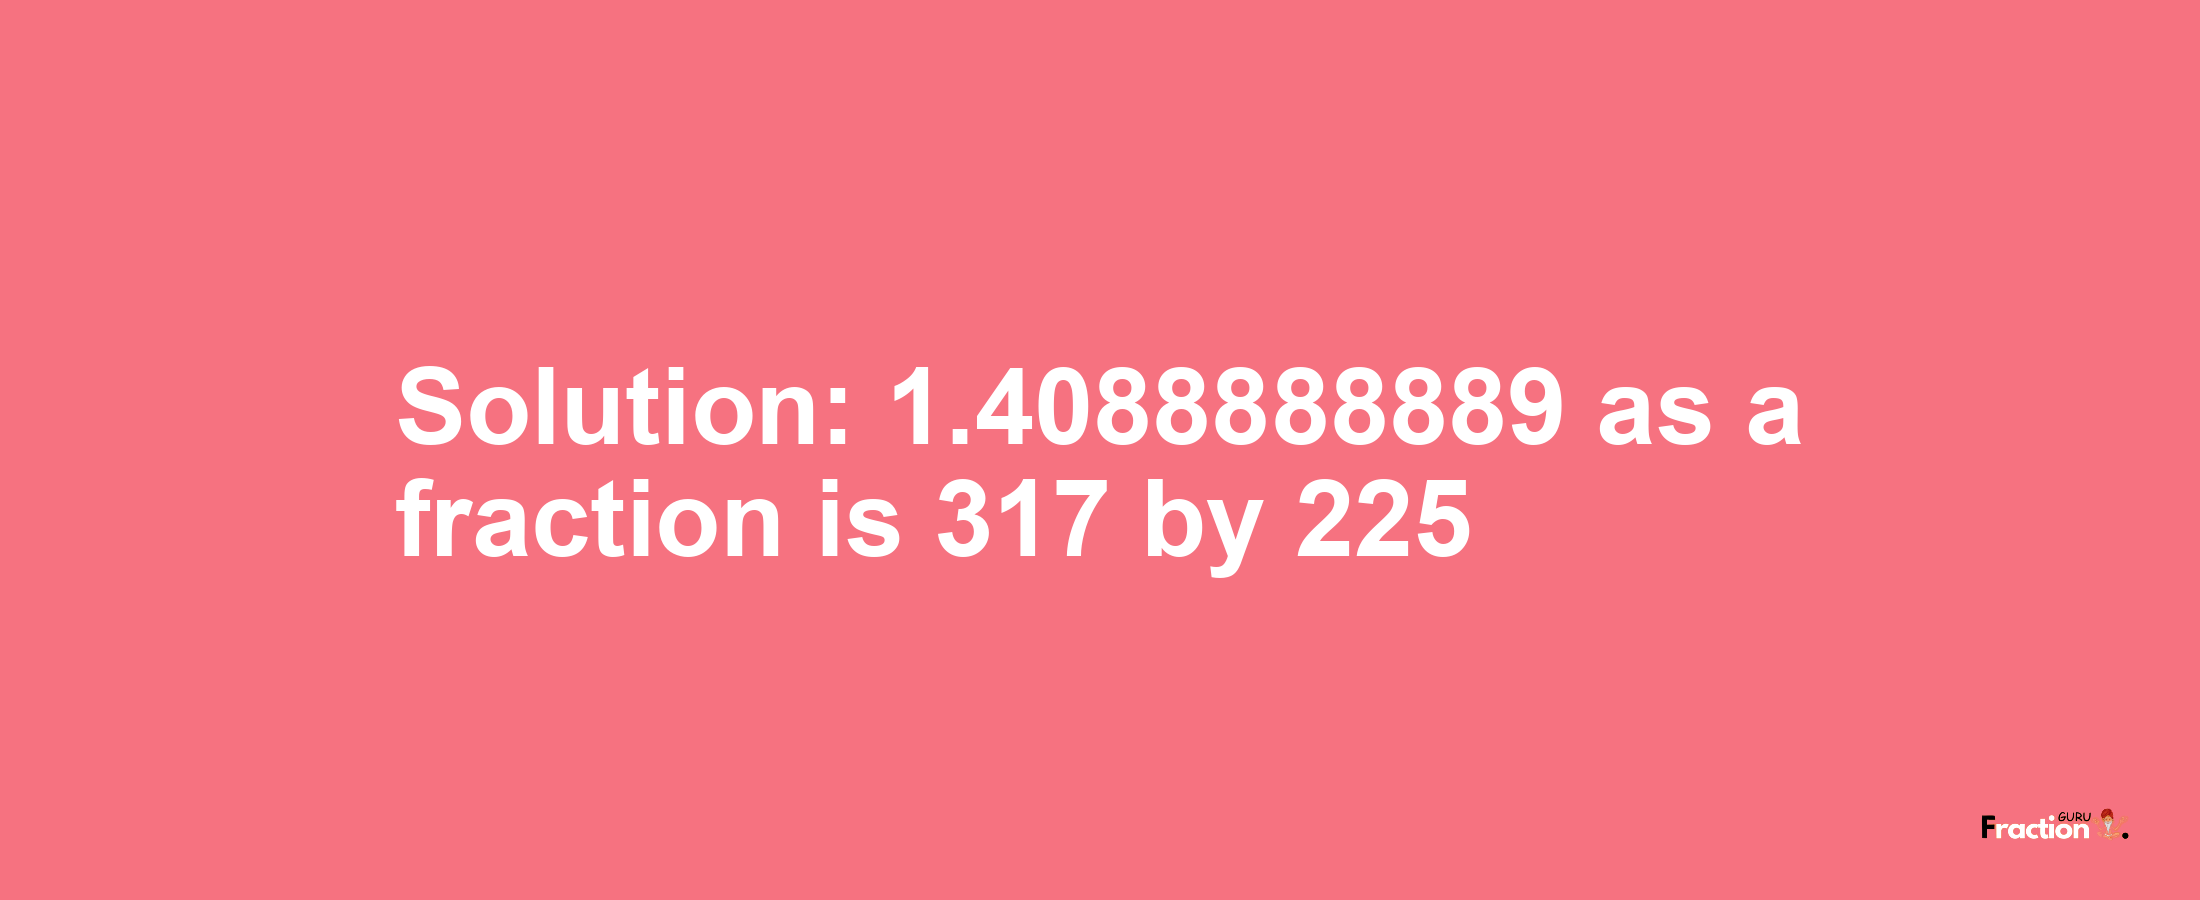 Solution:1.4088888889 as a fraction is 317/225